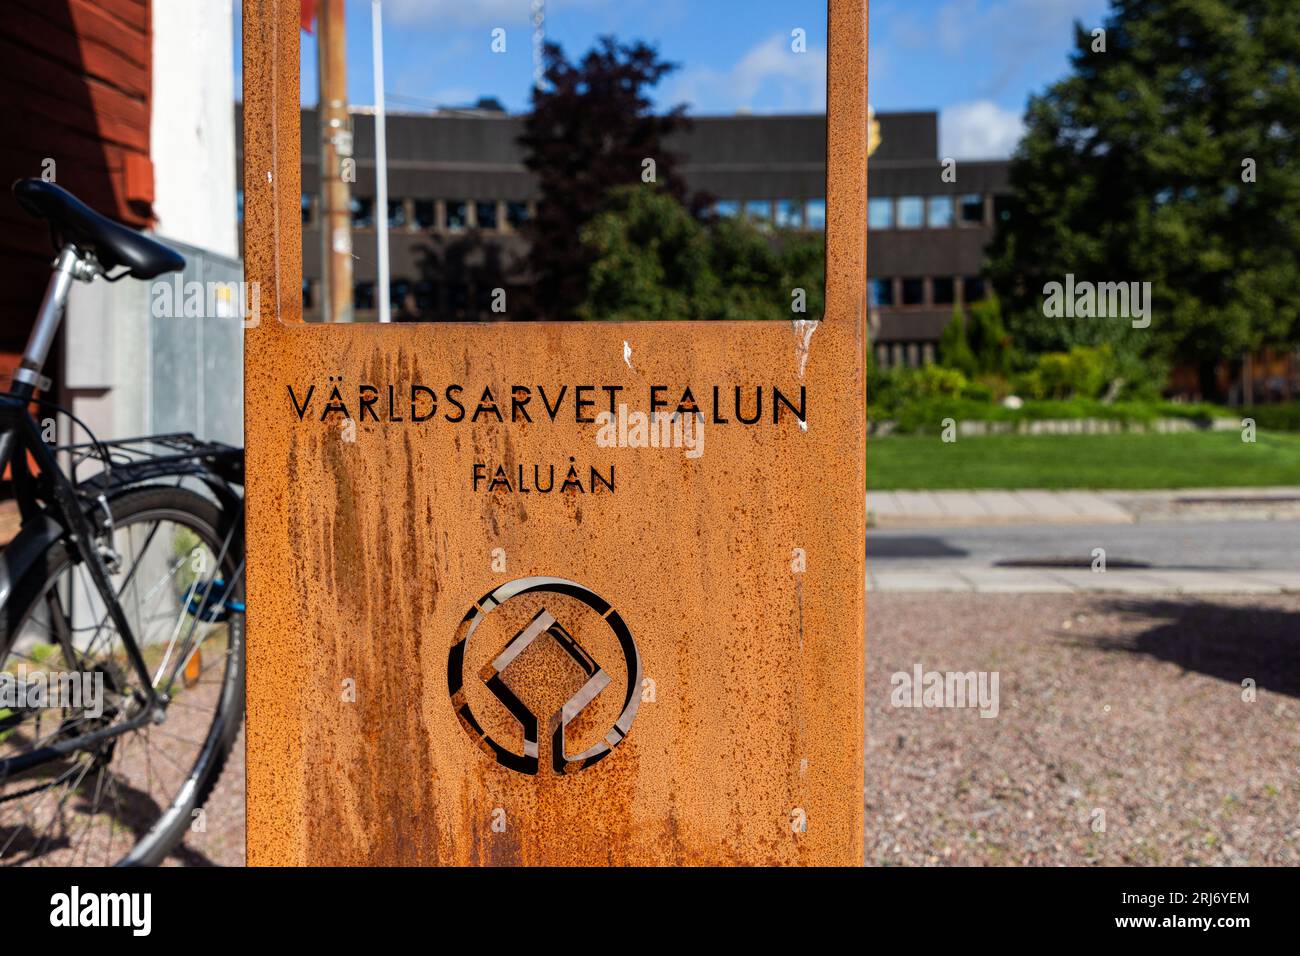 Signs and symbols, World heritage Falun, Sweden. Stock Photo